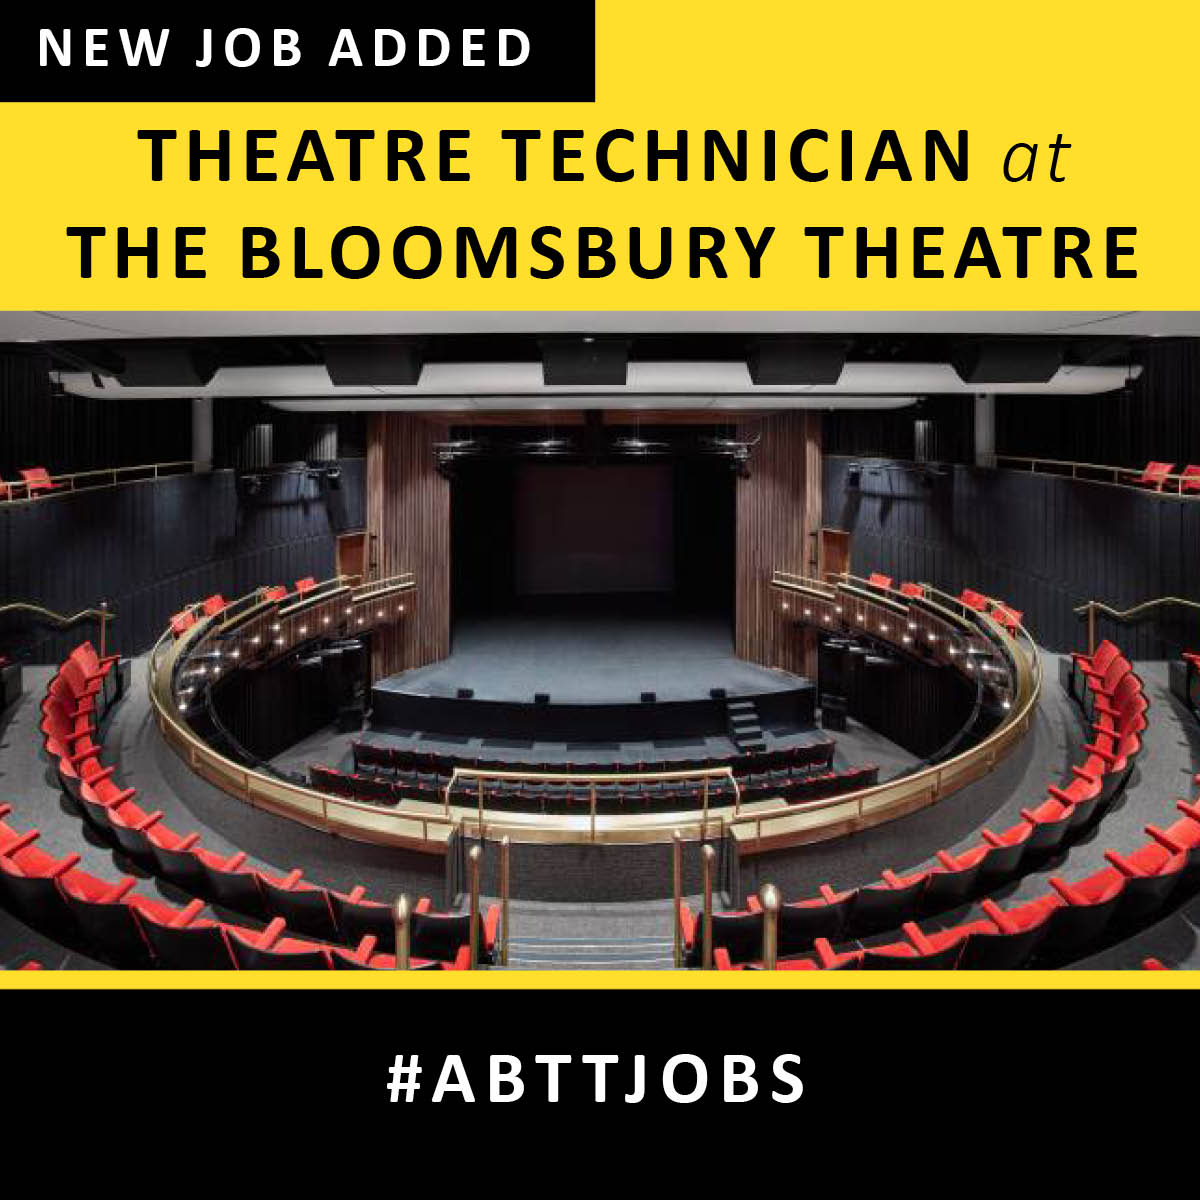 The Bloomsbury Theatre and Studio are looking for a multi skilled technician to join the team and work in their recently refurbished 541 seat Theatre and 70 seat studio.

Find out more and apply here: abtt.org.uk/jobs/theatre-t…

#ABTTjobs #TheatreJobs #Artsjobs #BackstageJobs